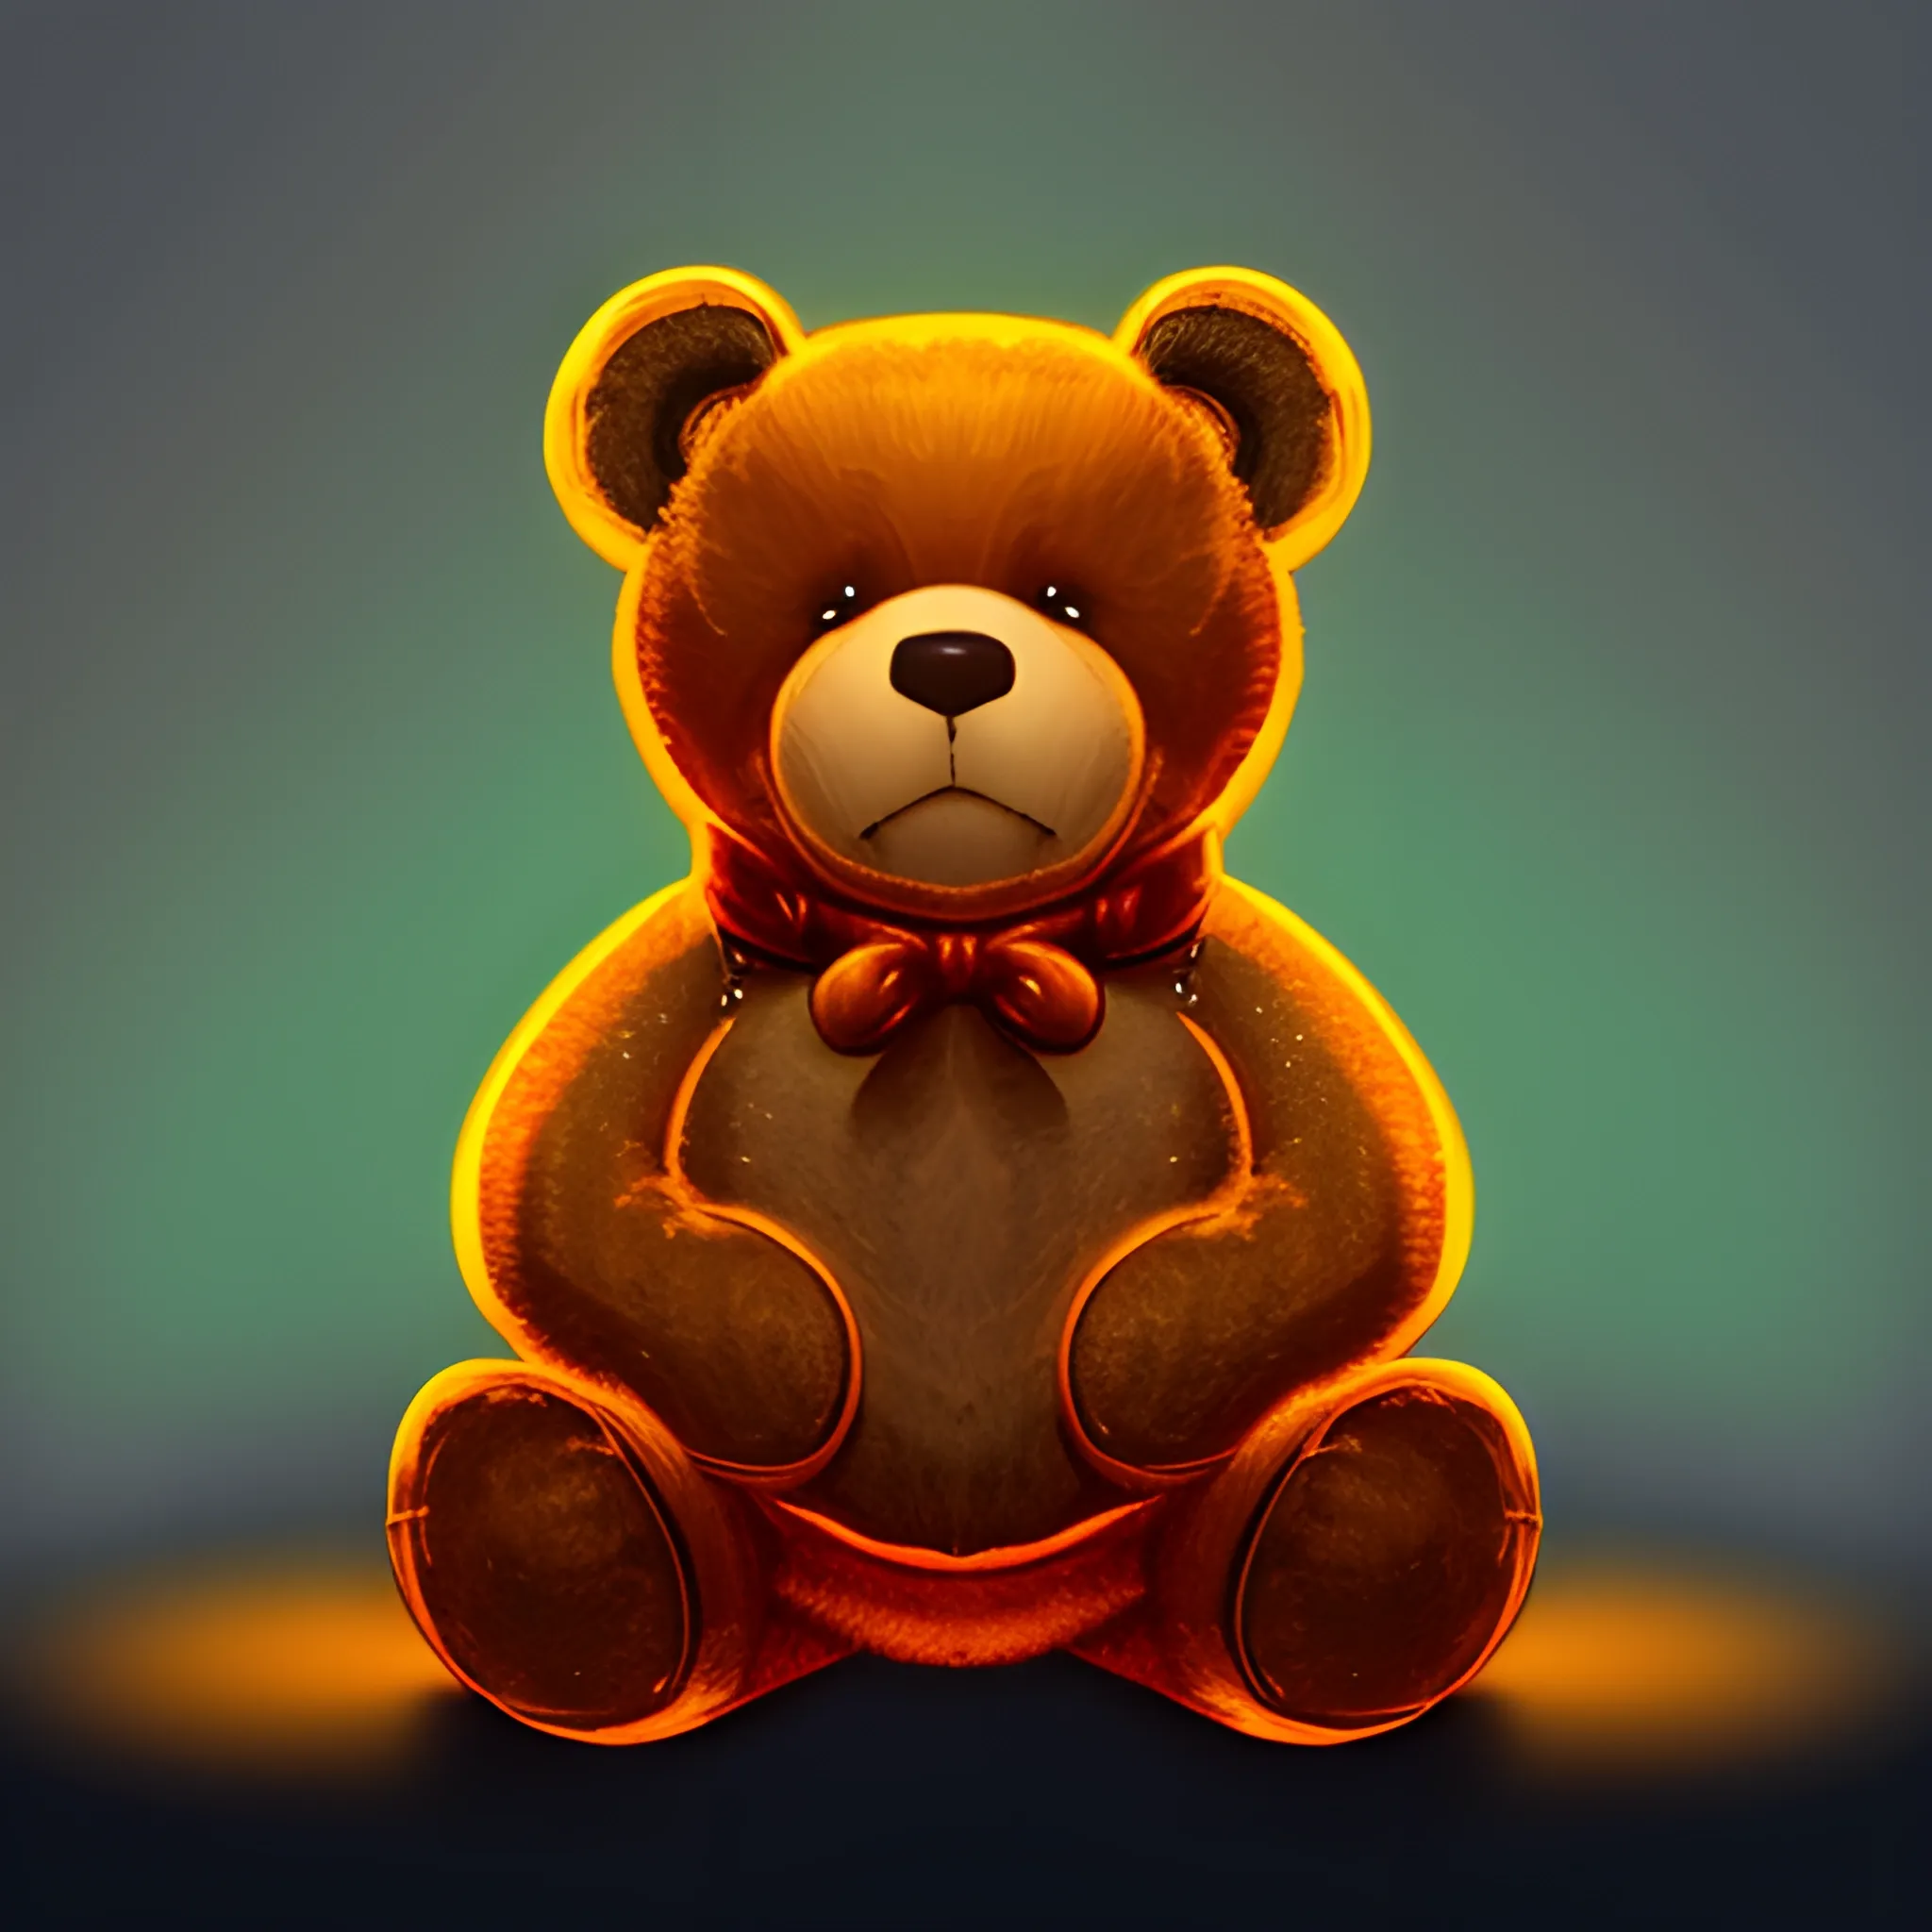 illustration of small teddy bear sitting in profile, illuminated with side light, digital painting style with warm colors.